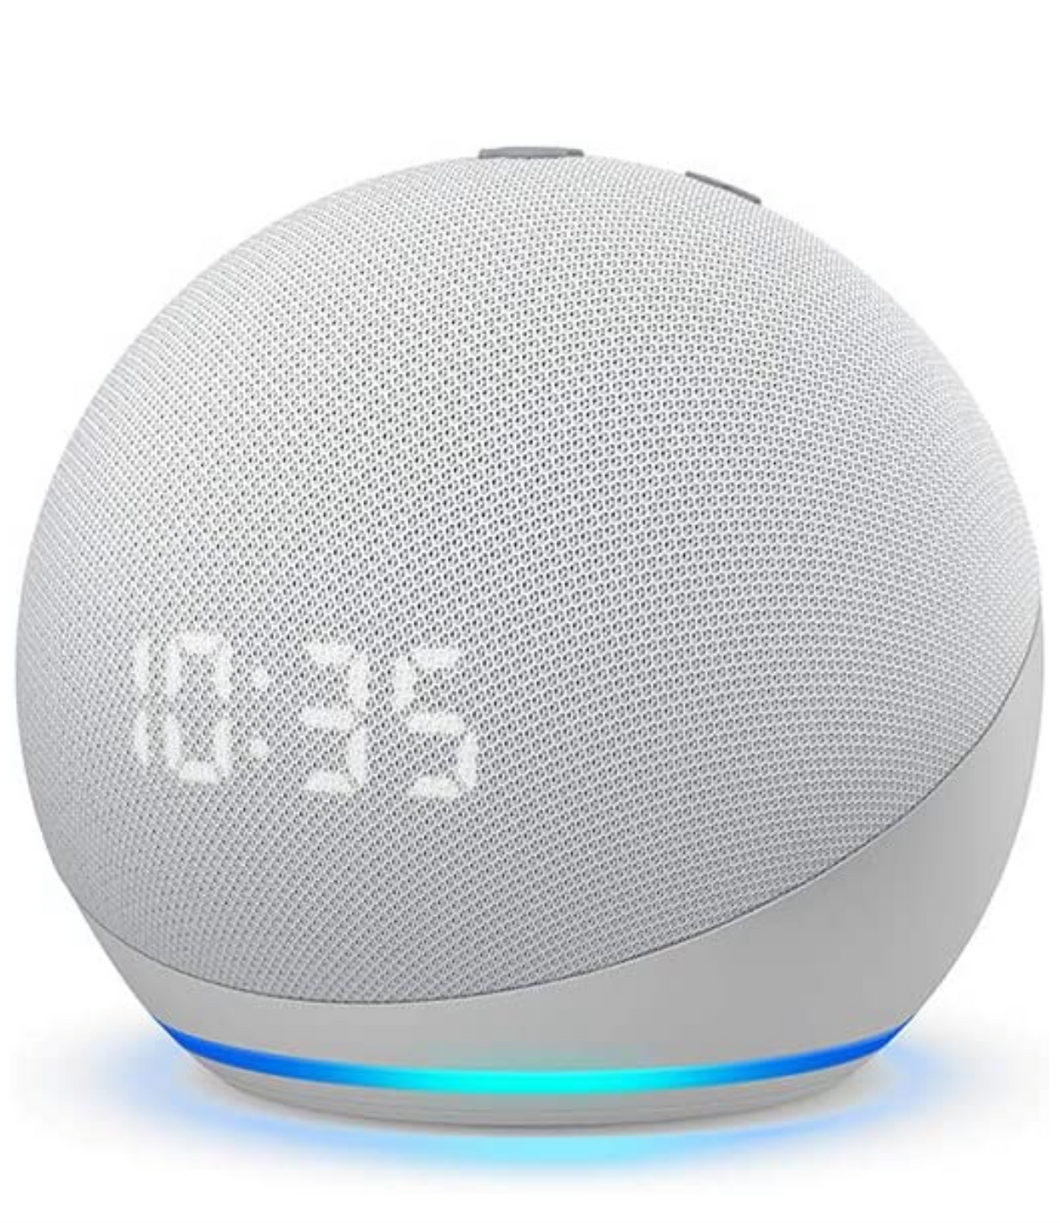 All-new Echo Dot (4th Gen) with clock | Next generation smart speaker with improved bass, LED display and Alexa (White)